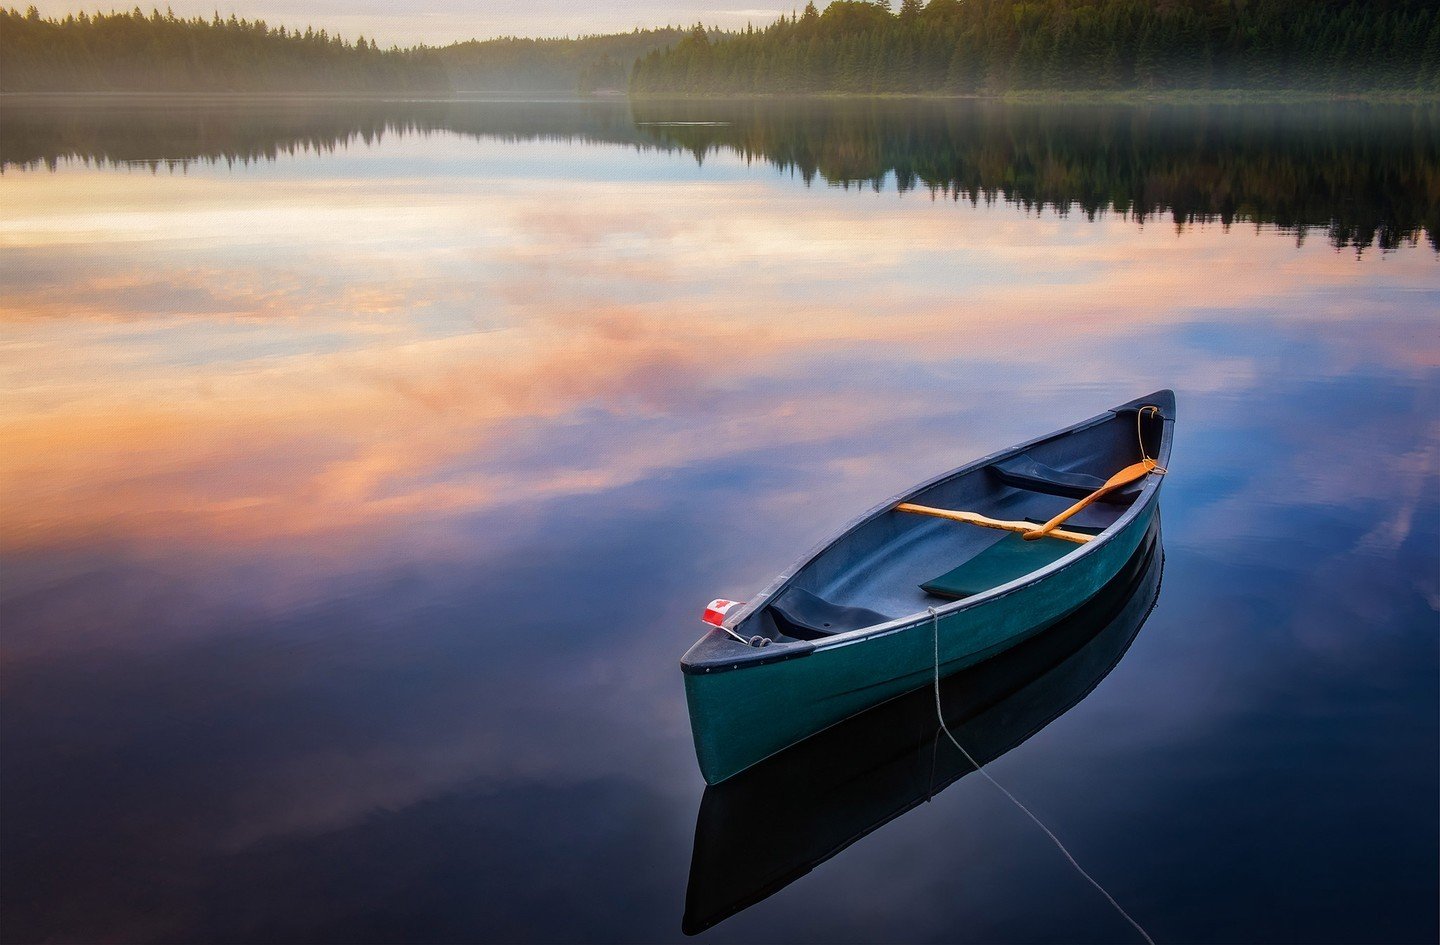 I was fortunate to capture this peaceful scene on Canada Day weekend, at Bennett Lake in Fundy National Park, NB several years ago. This image is extra special to me, because the following day, my partner and I met with a real estate agent, and saw t